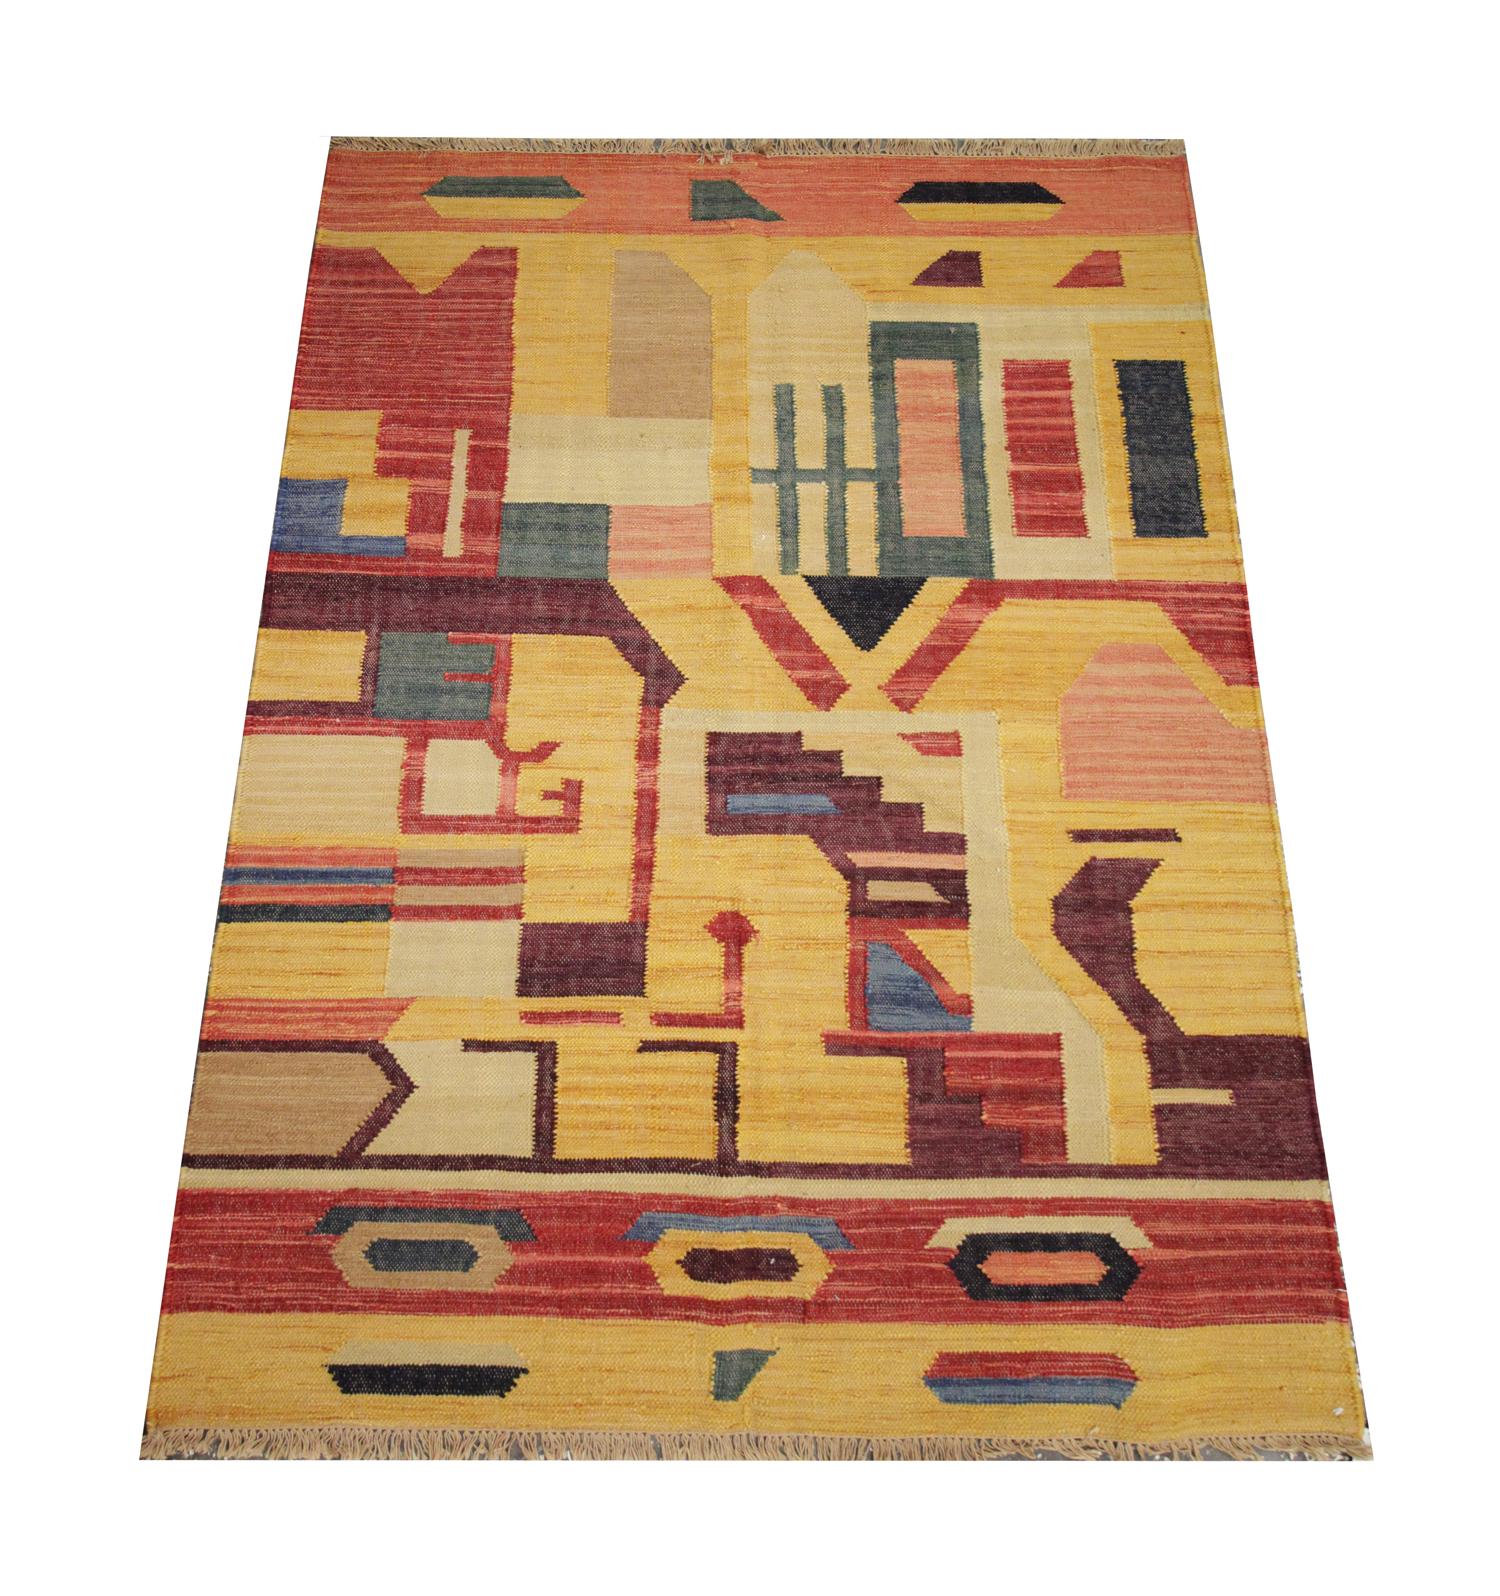 This bold and beautiful piece is a handwoven Kilim rug, constructed with a vibrant colour palette including orange, yellow, red and blue, that make up the eye-catching abstract design. Featuring geometric shapes randomly placed to create a